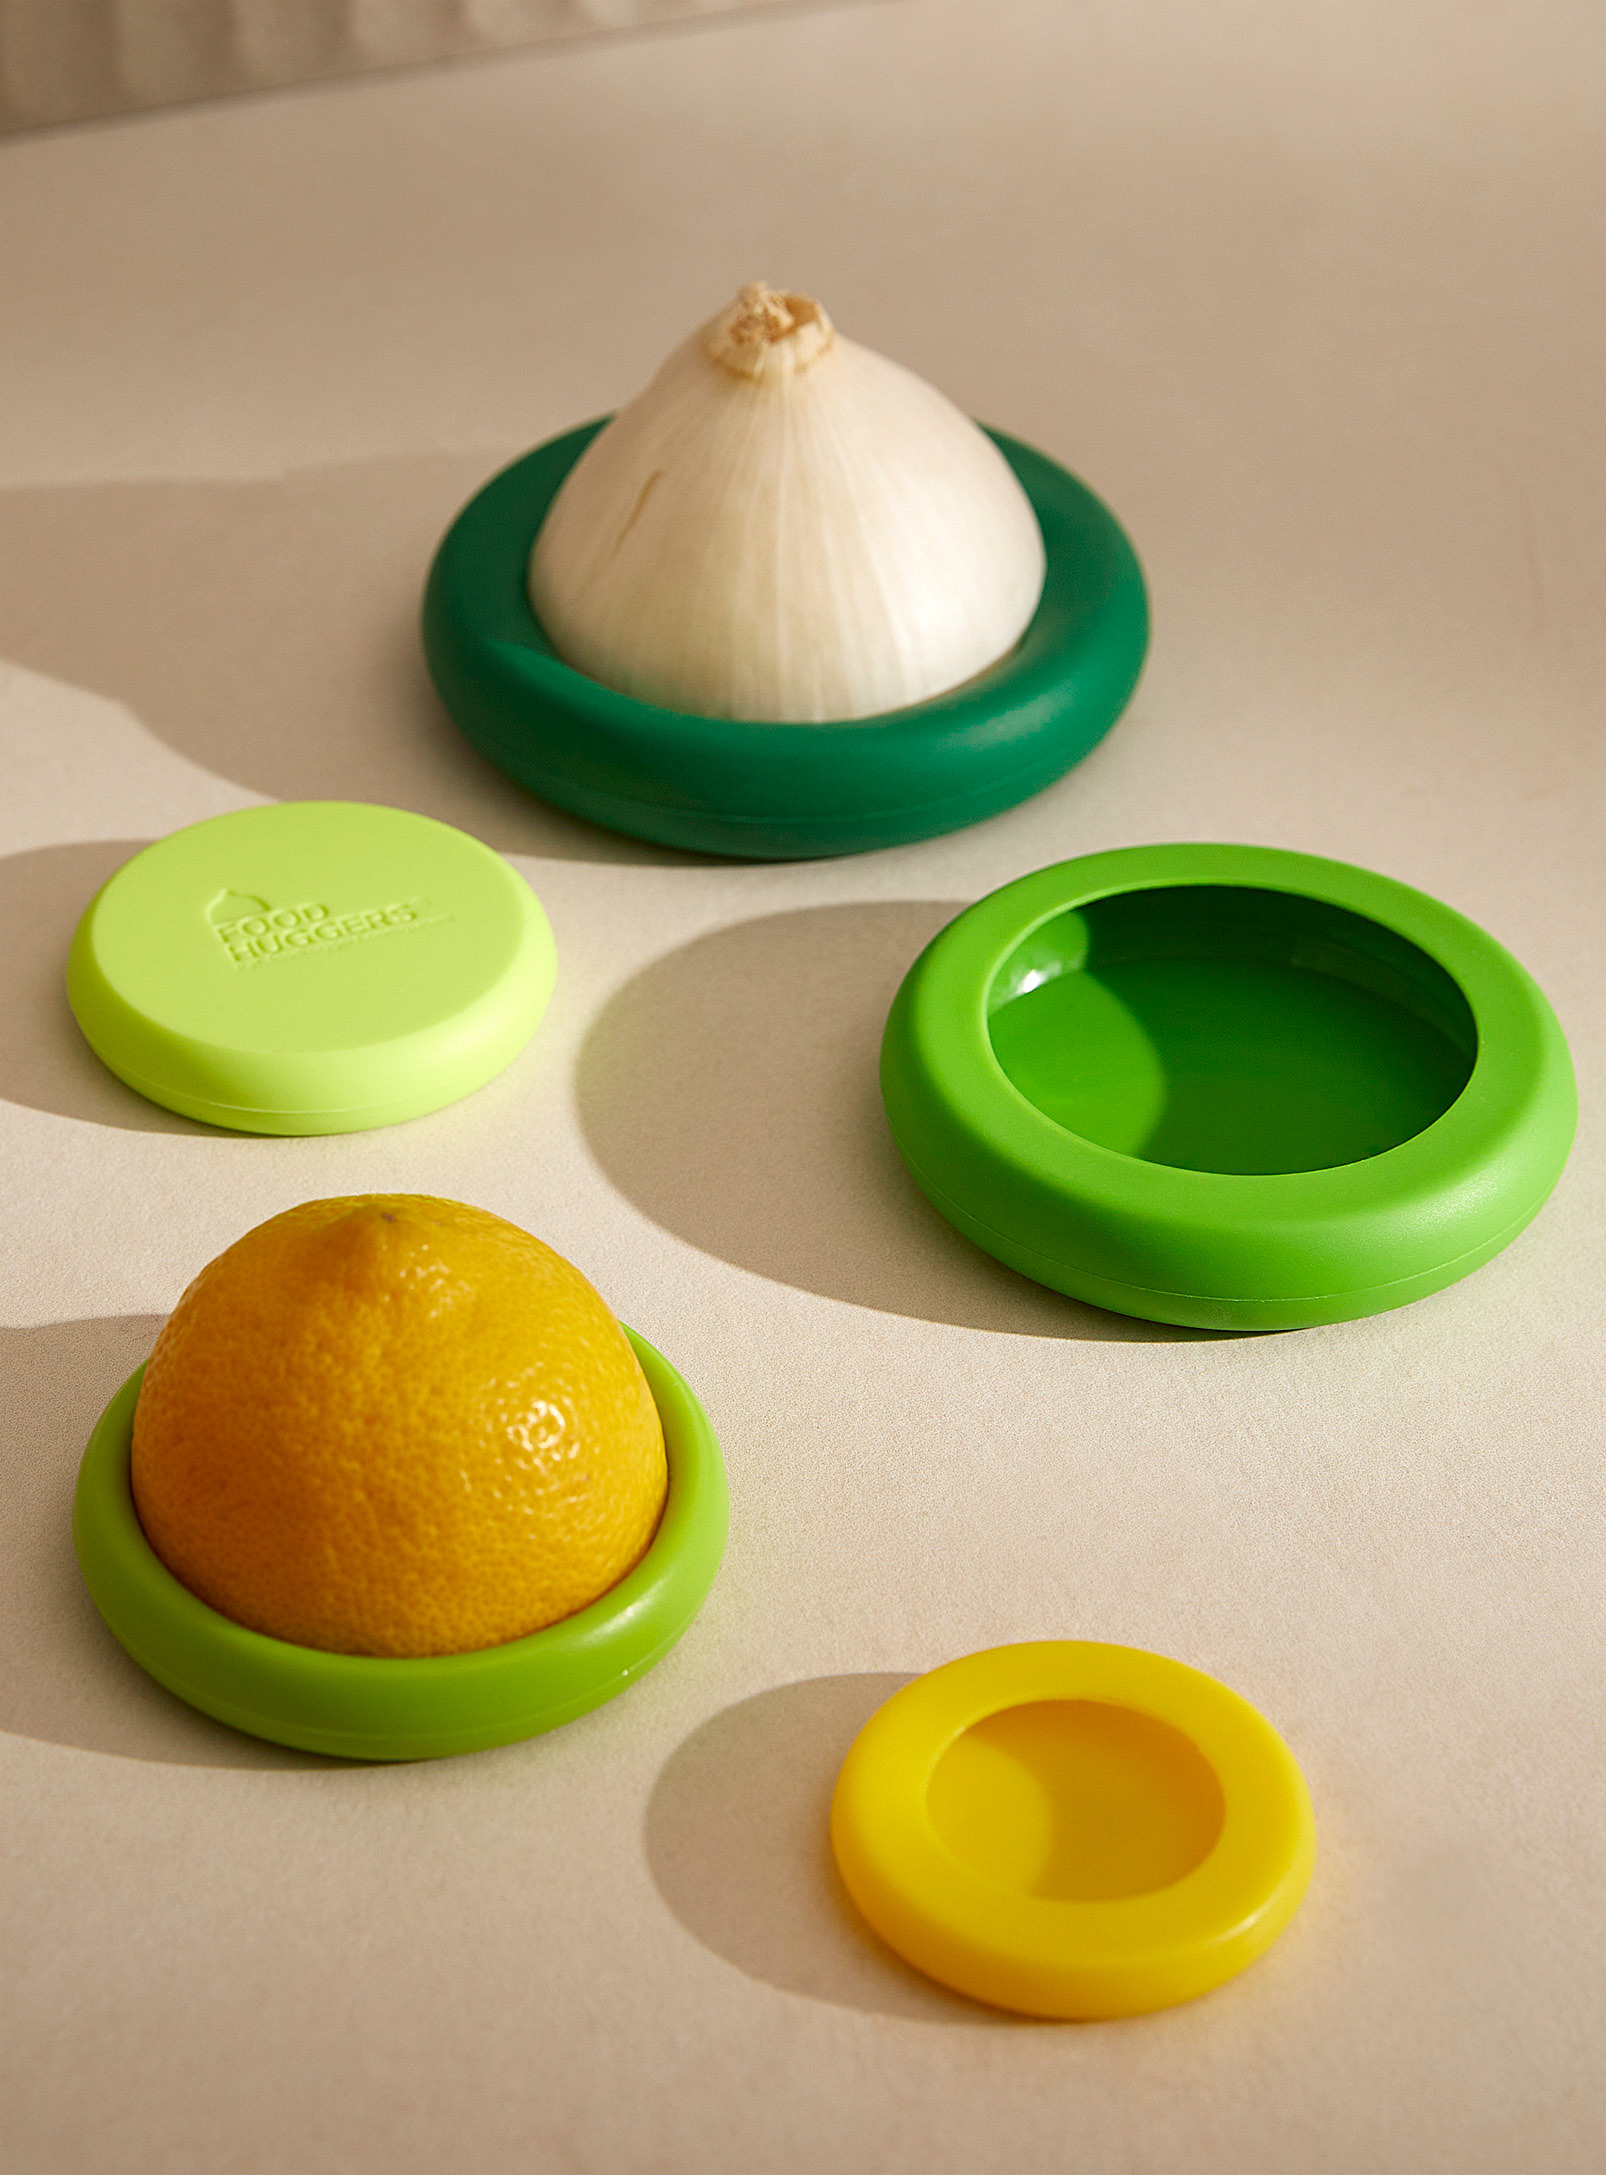 Simons Maison Fruit And Vegetable Silicone Lids Set Of 5 In Green